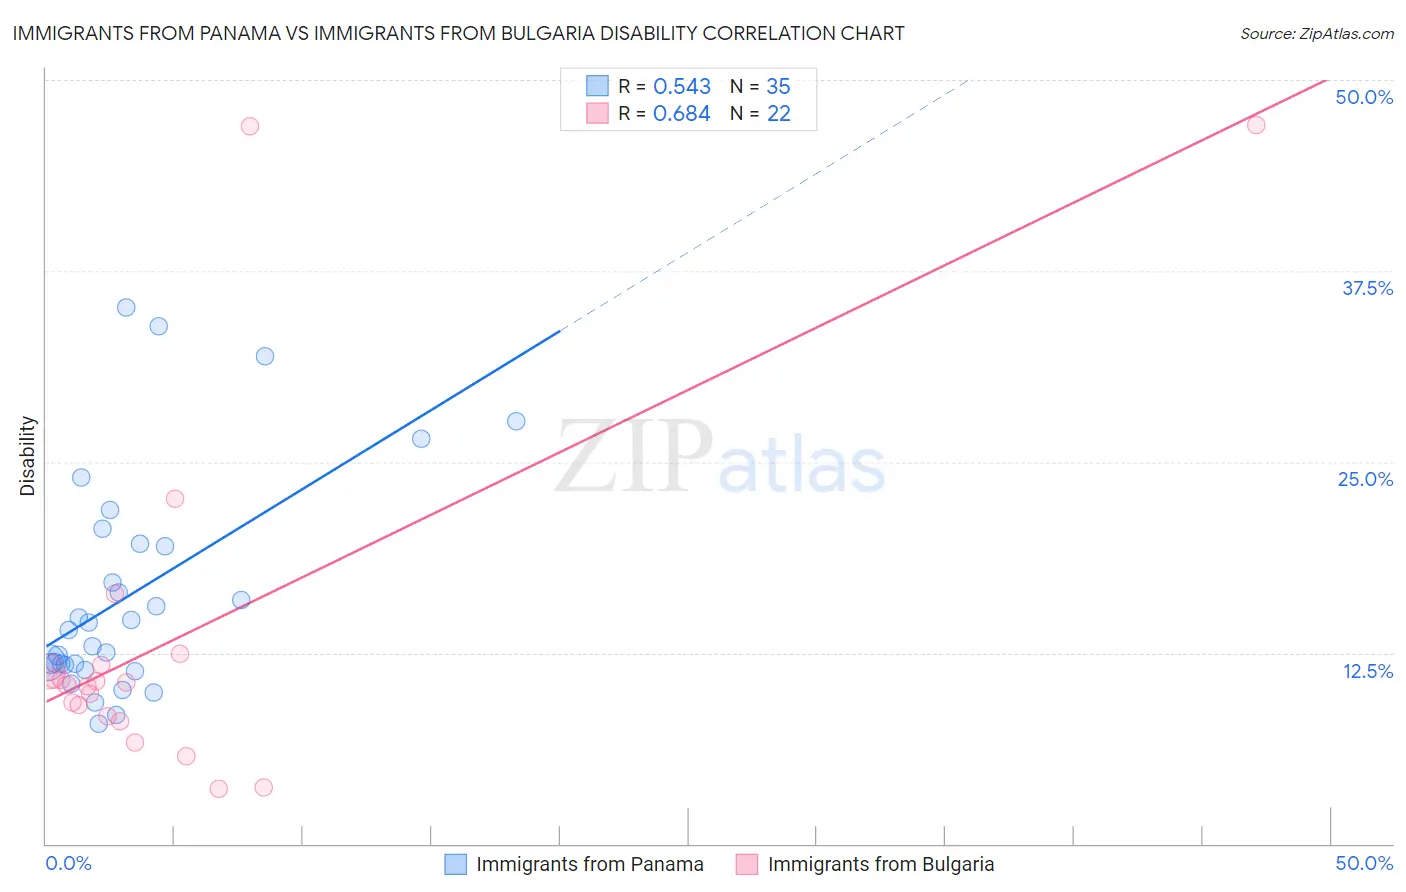 Immigrants from Panama vs Immigrants from Bulgaria Disability